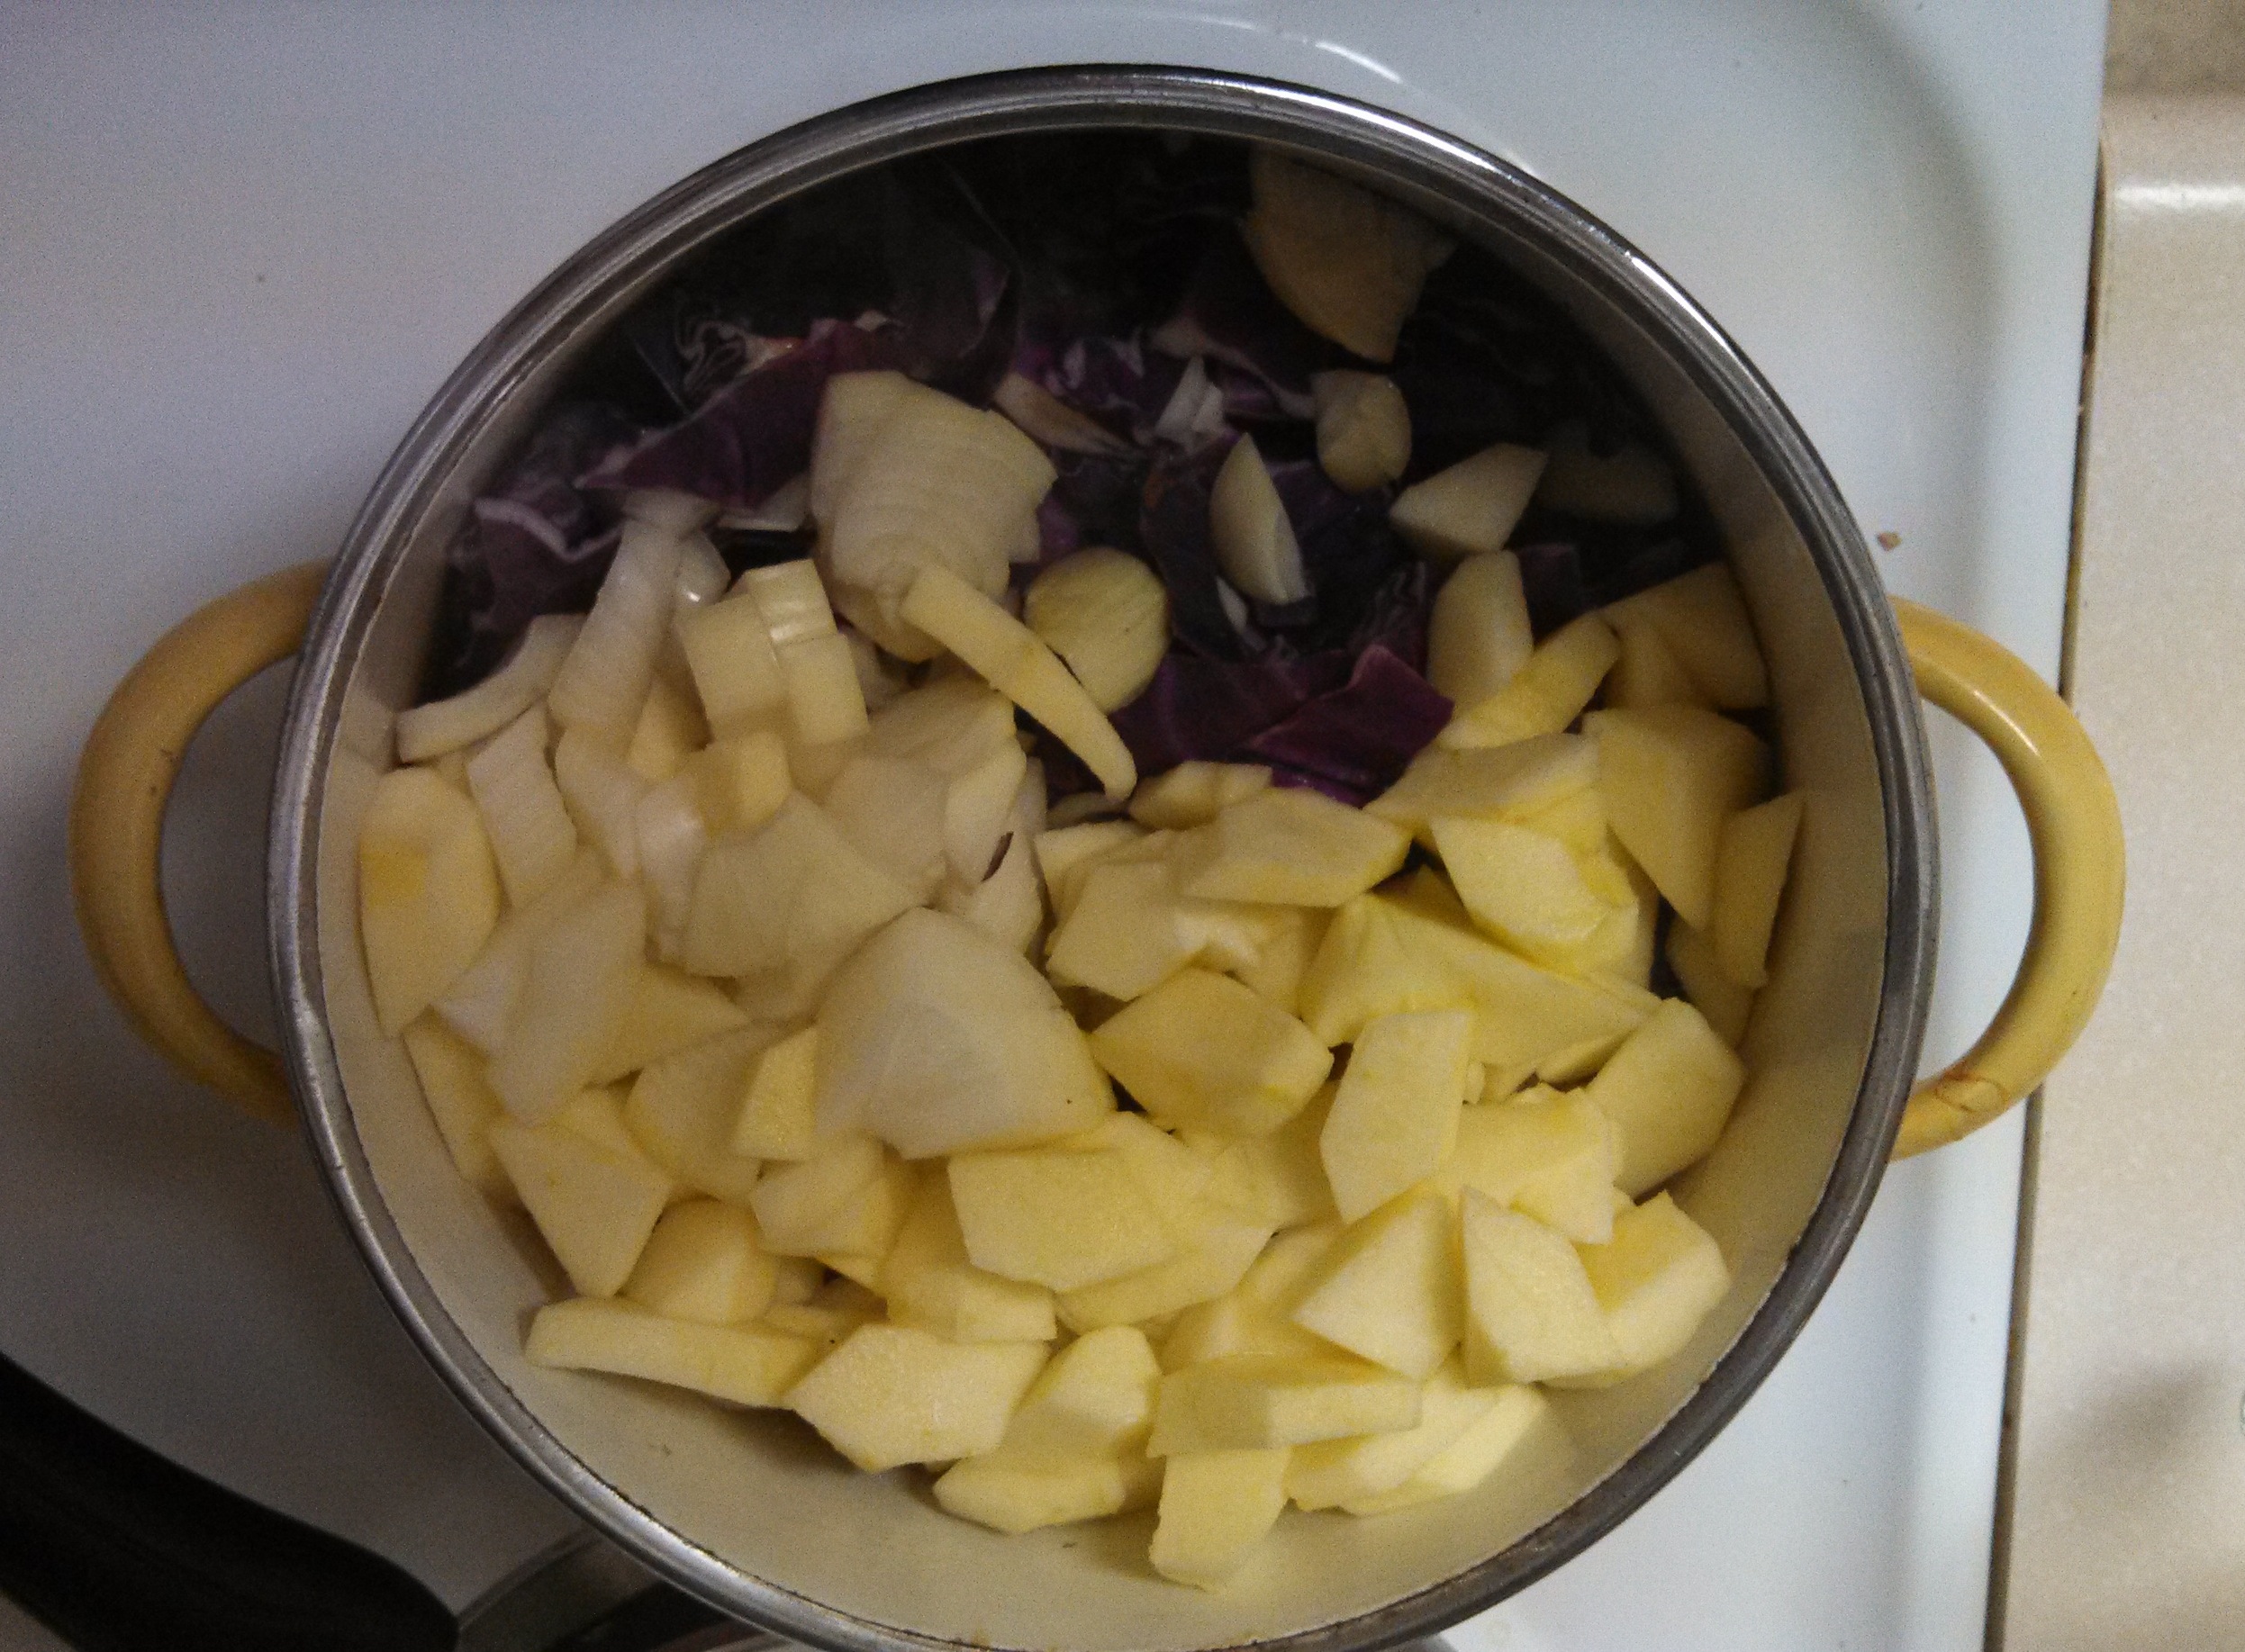 Red cabbage in process